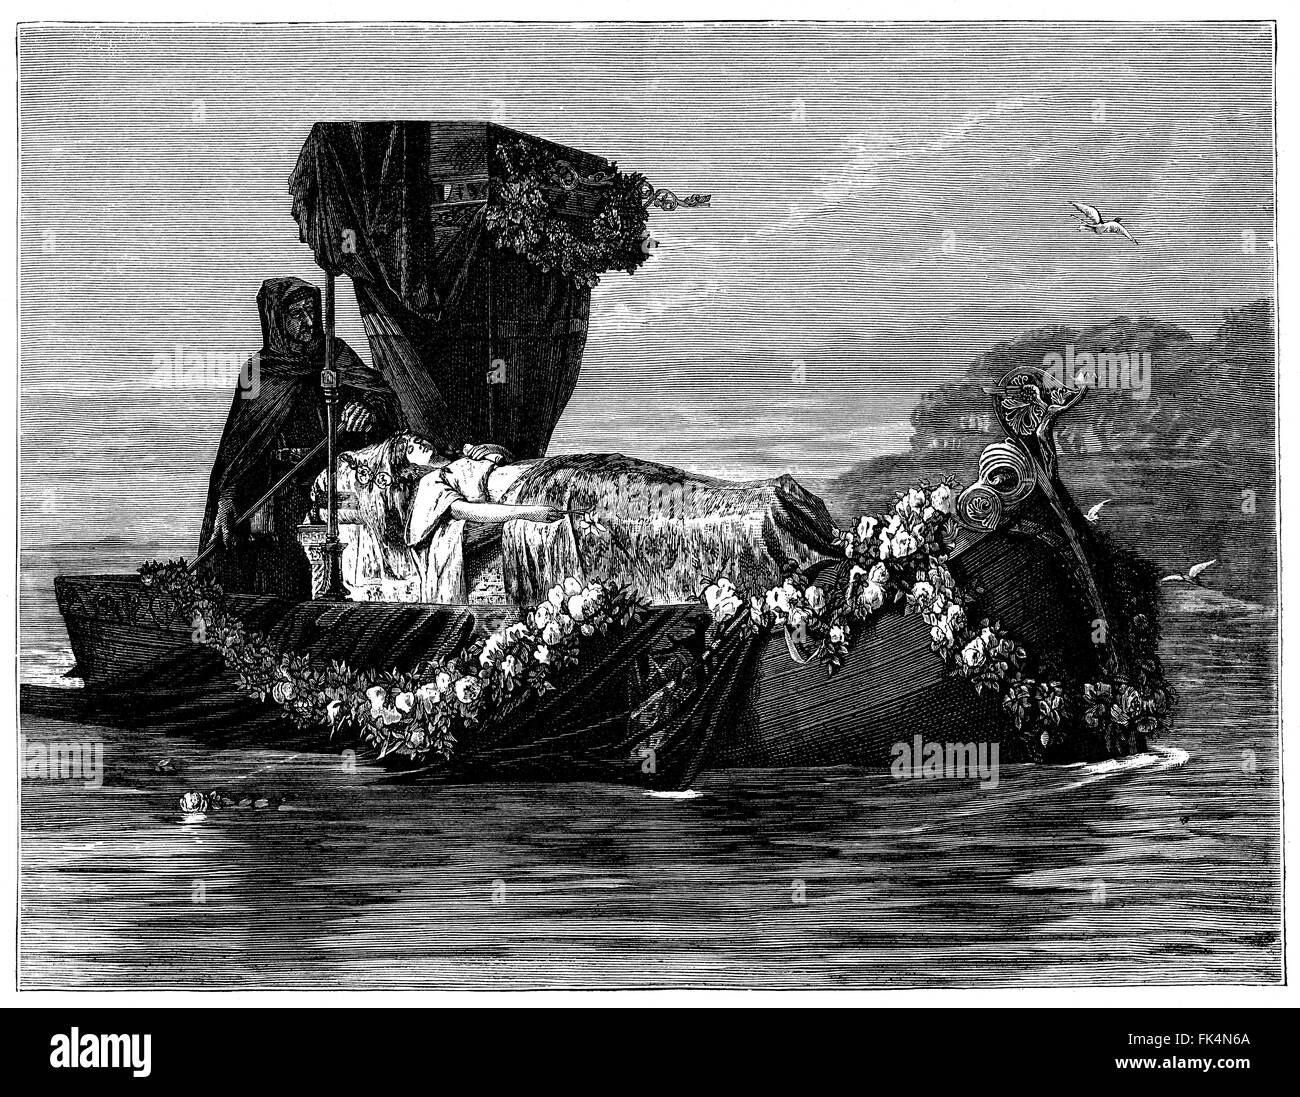 Rosenthal's Elaine  - Lady of Chalotte floating dead in her funeral barge on the River Thames (Charon and Styx?) Stock Photo